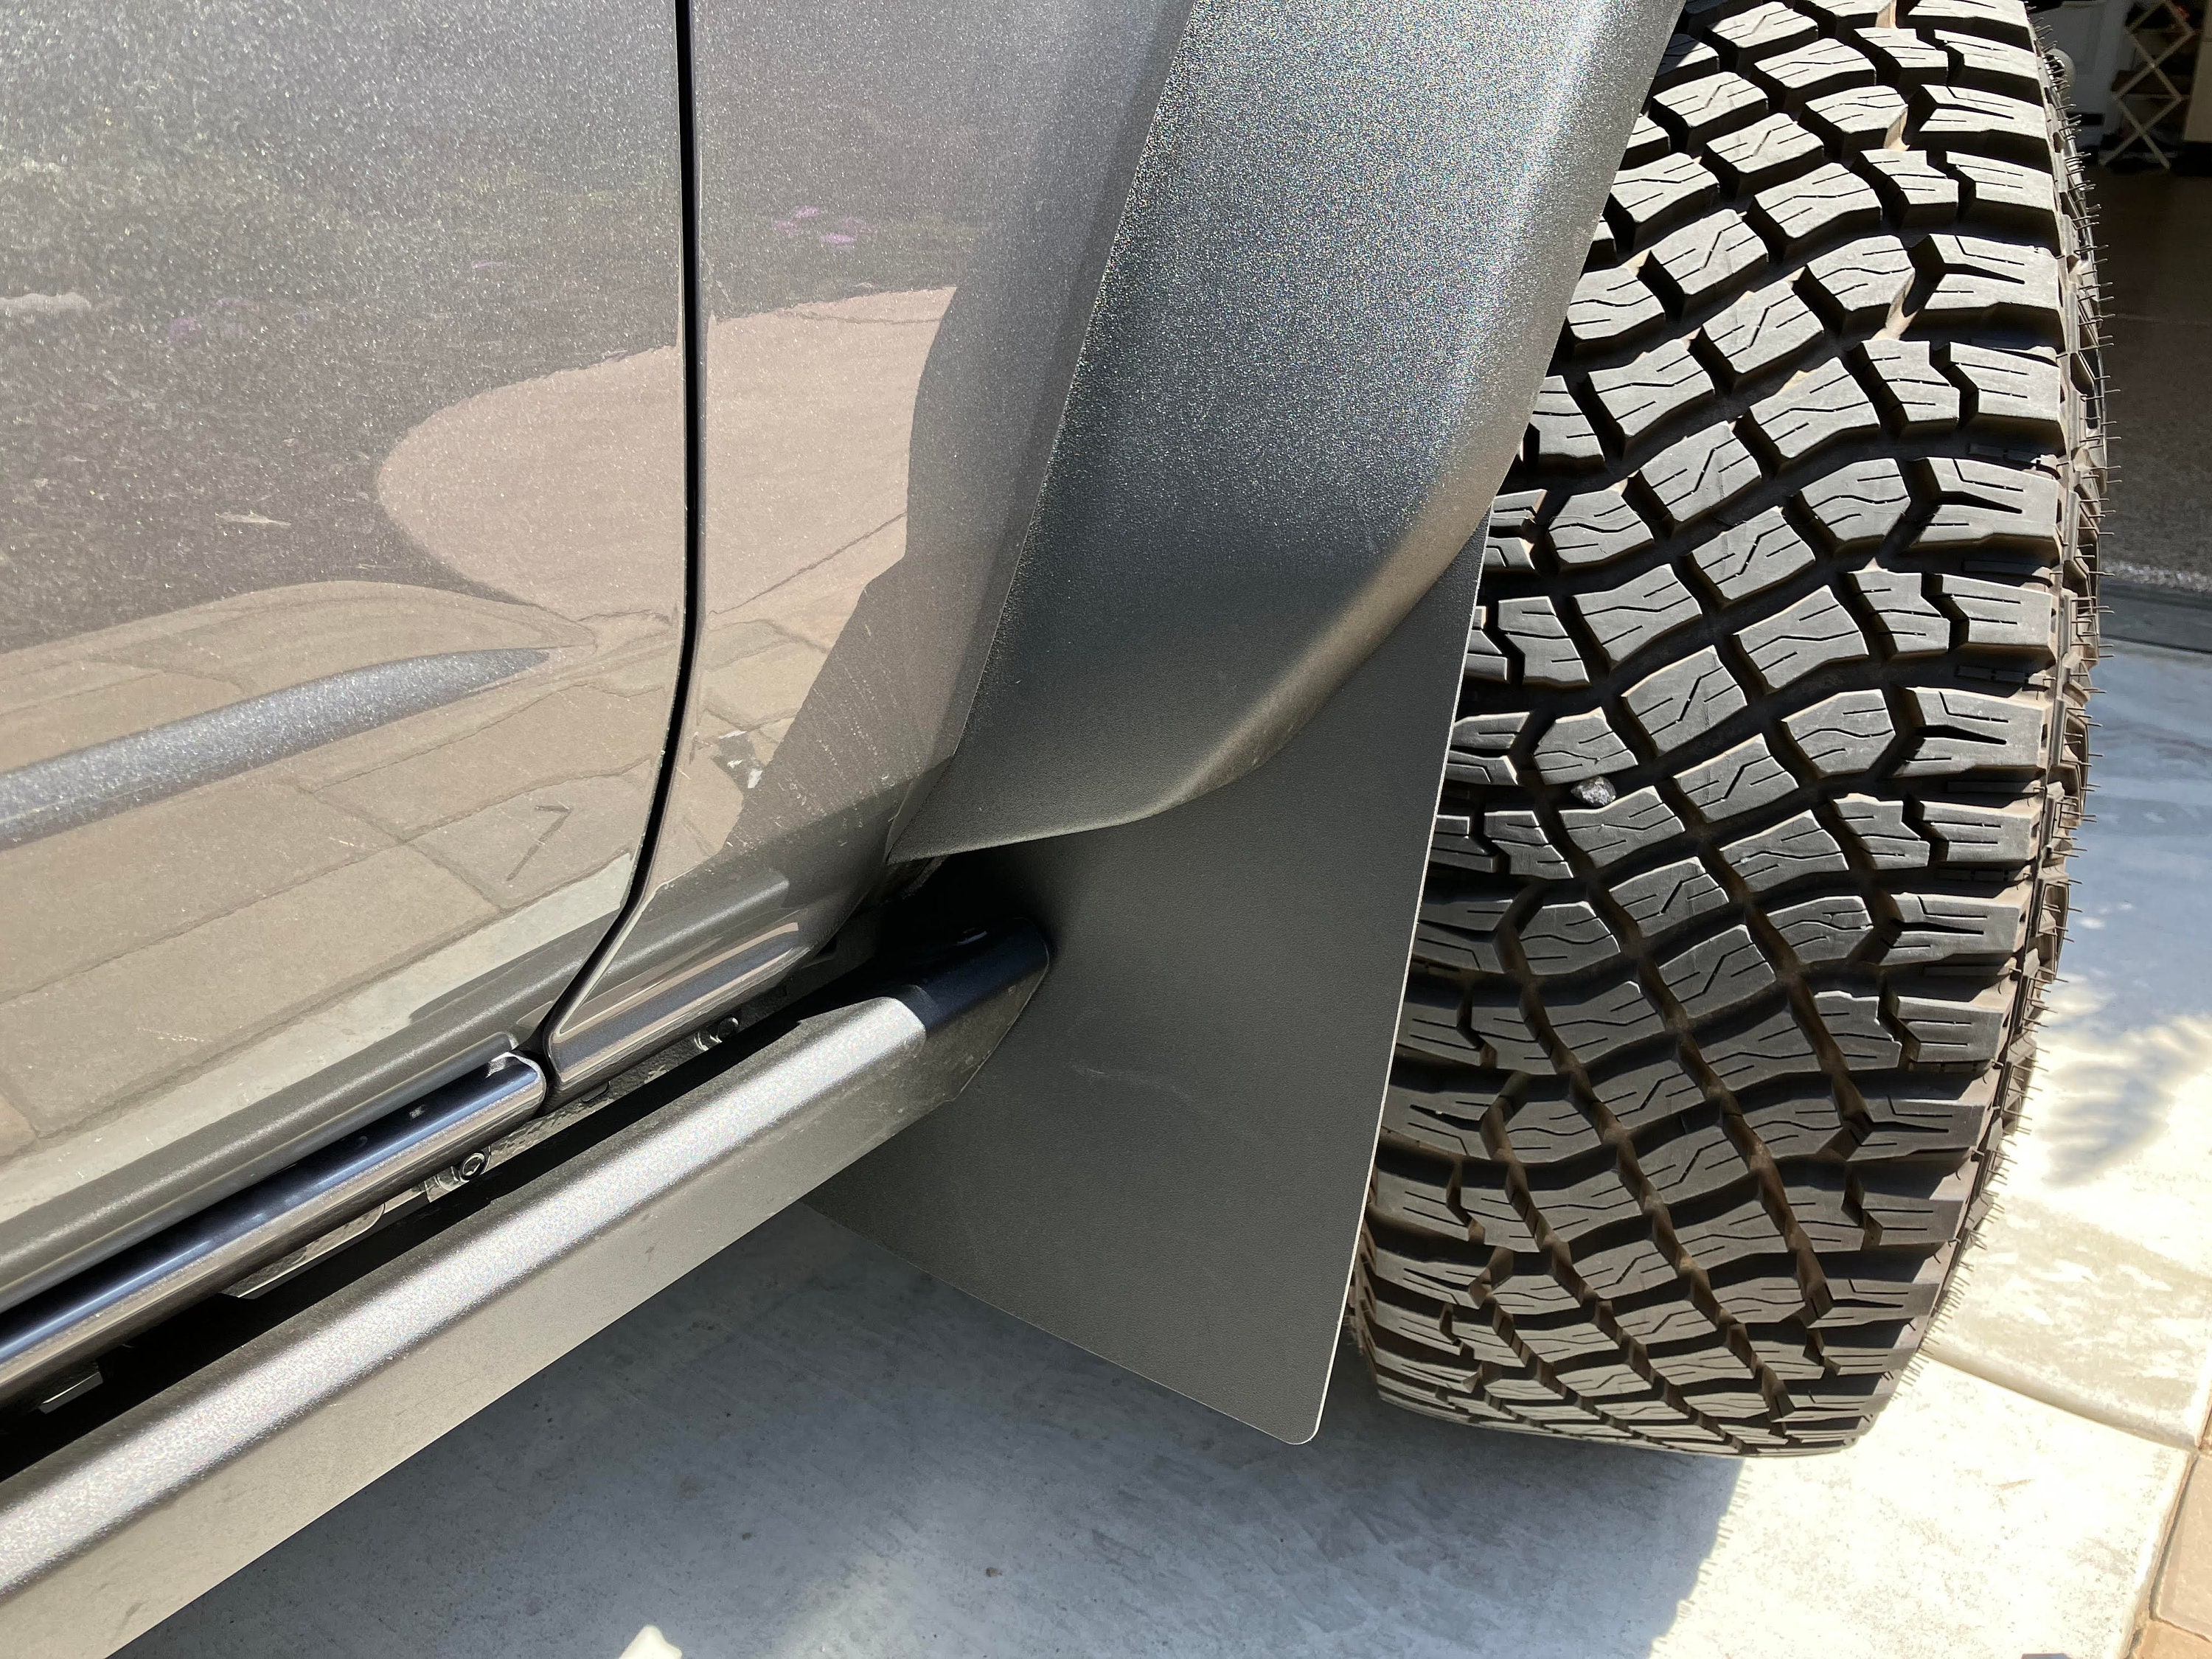 Bro Flaps: Non-sasquatch Front and Rear Mudflaps / Splash Guards for  Bronco, With or Without Factory Rock Sliders and Factory Sidesteps -   Ireland